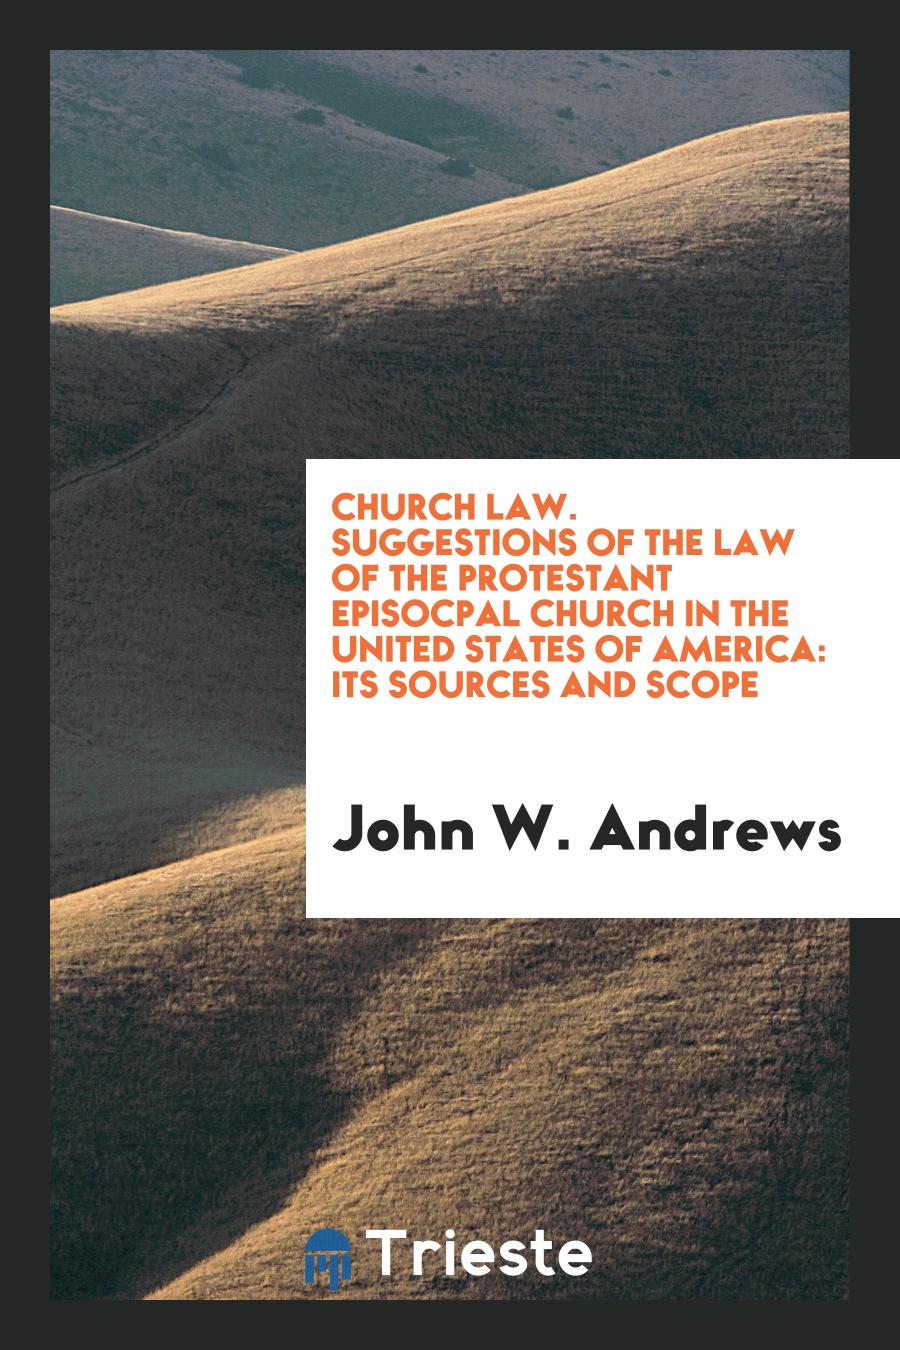 John W. Andrews - Church Law. Suggestions of the Law of the Protestant Episocpal Church in the United States of America: Its Sources and Scope